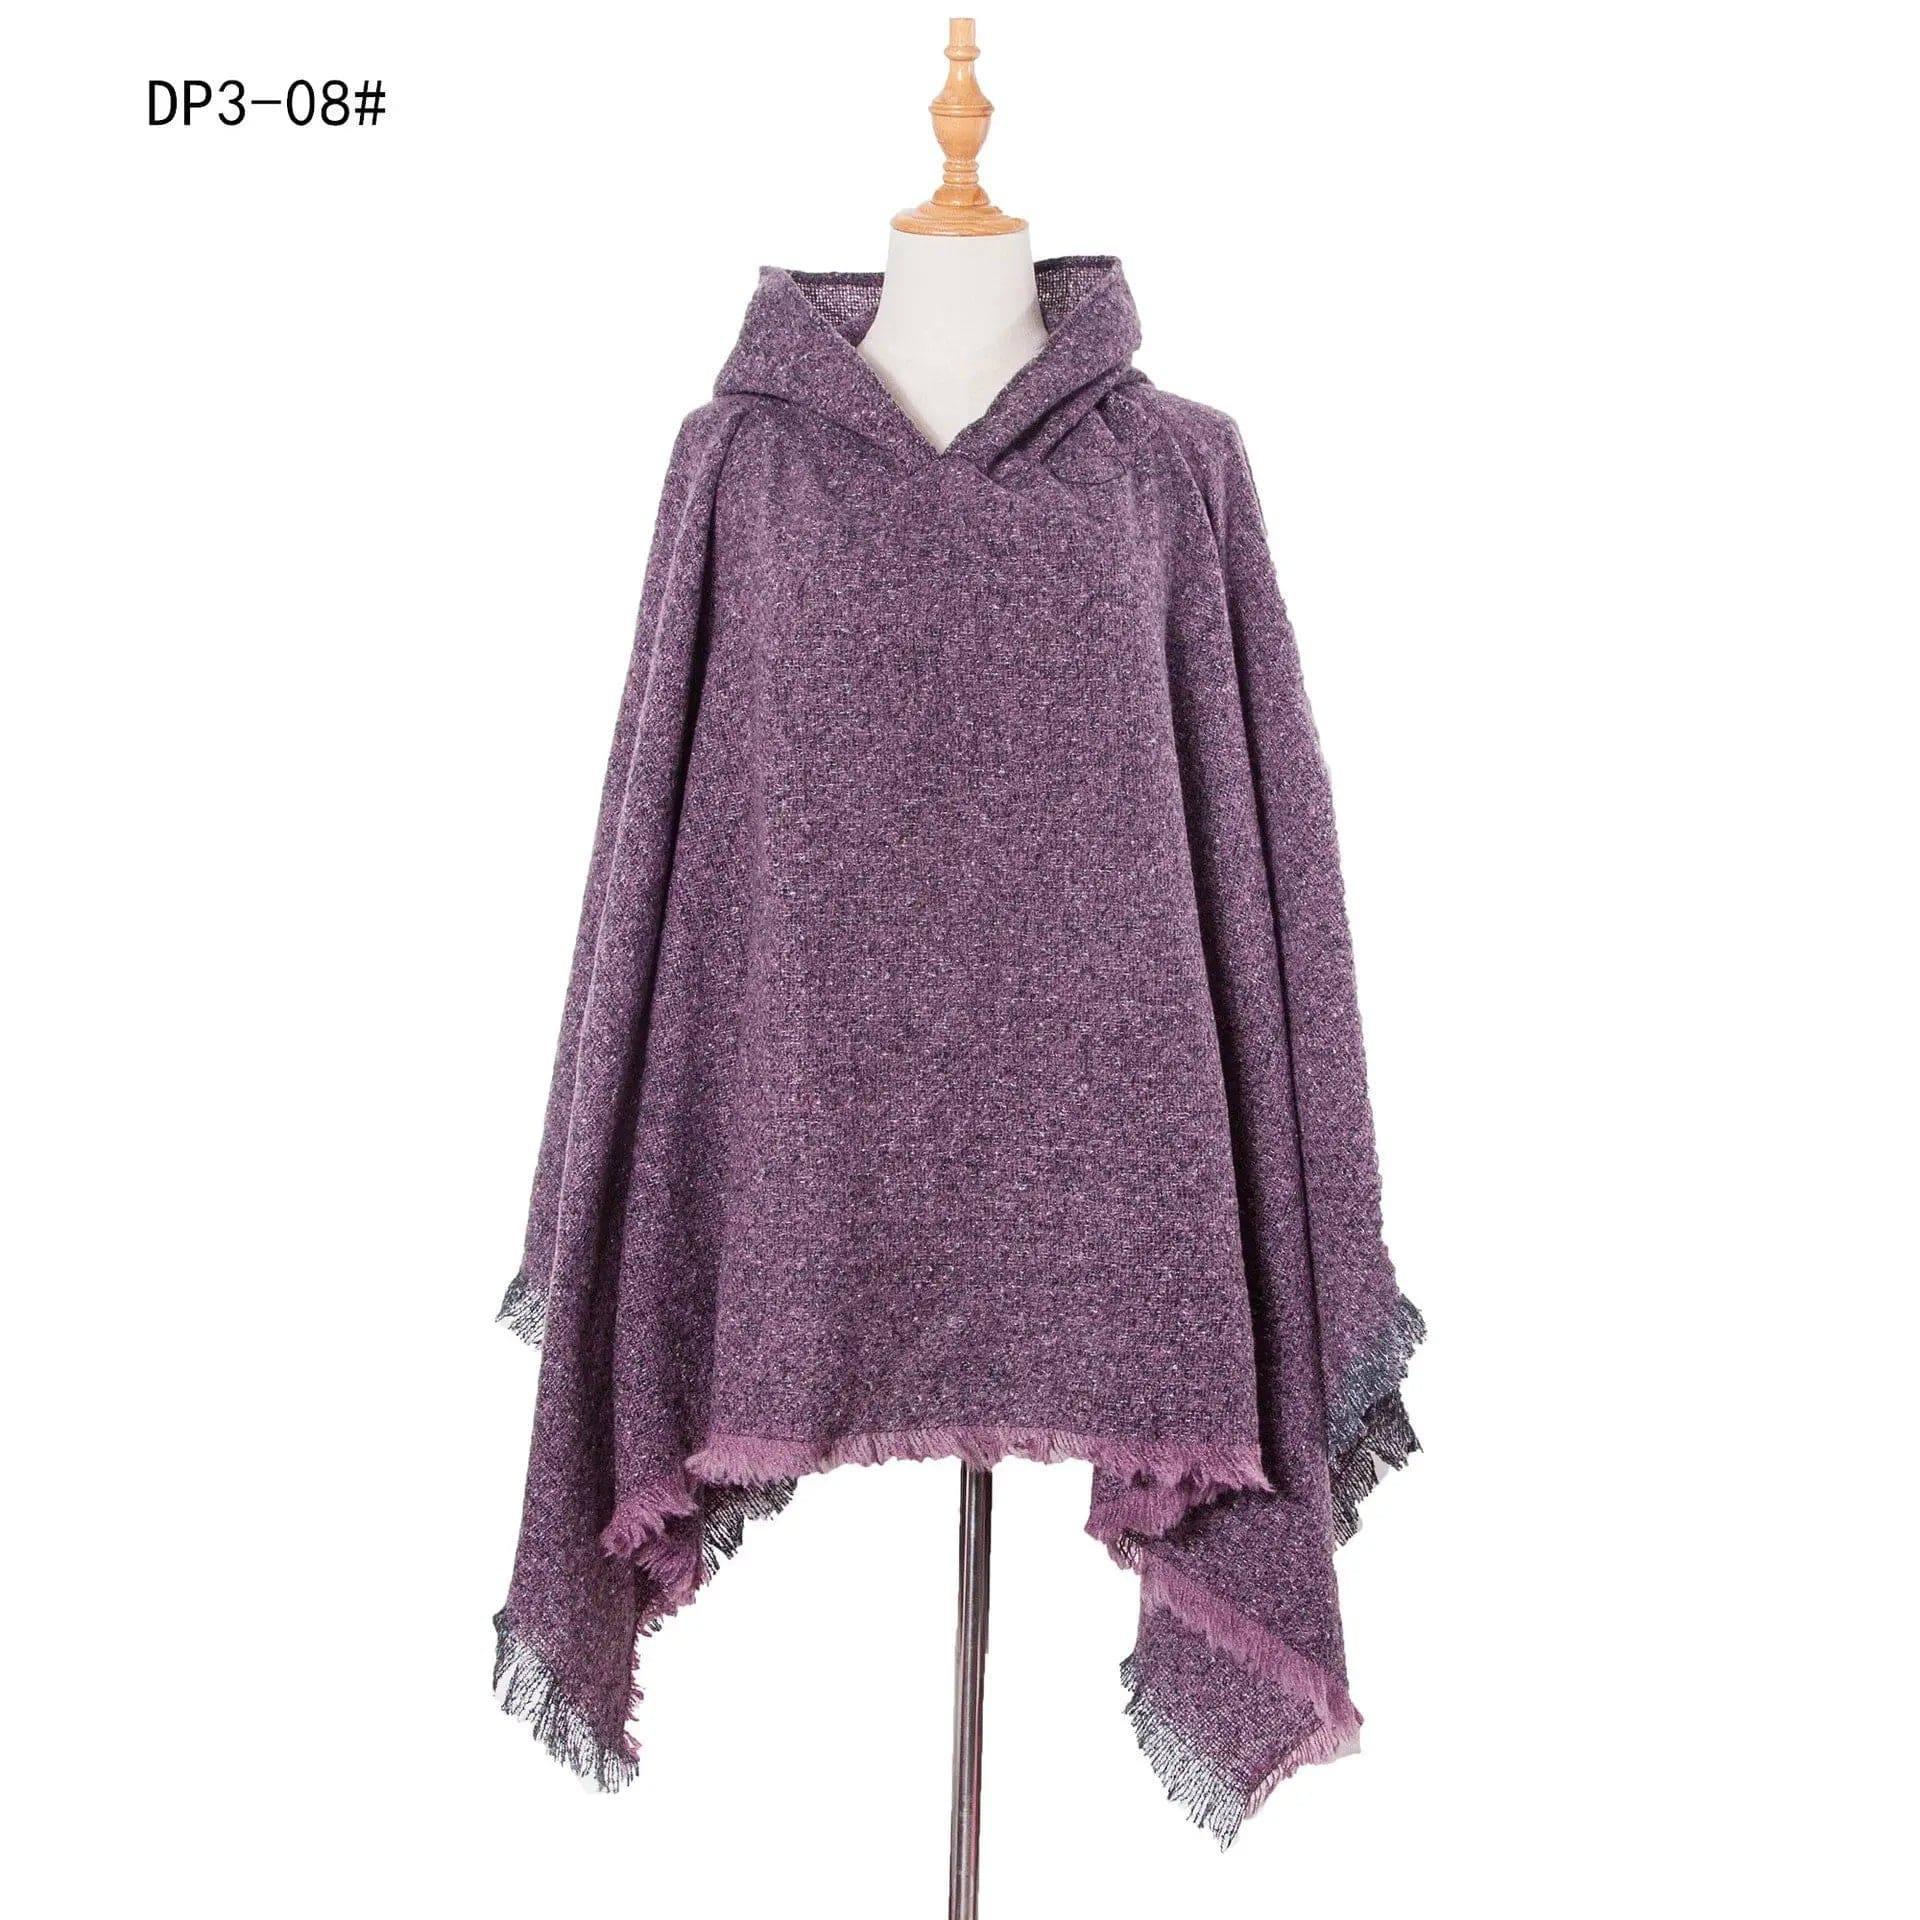 Spring Autumn And Winter Plaid Ribbon Cap Cape And Shawl-DP3 08 Purple-21